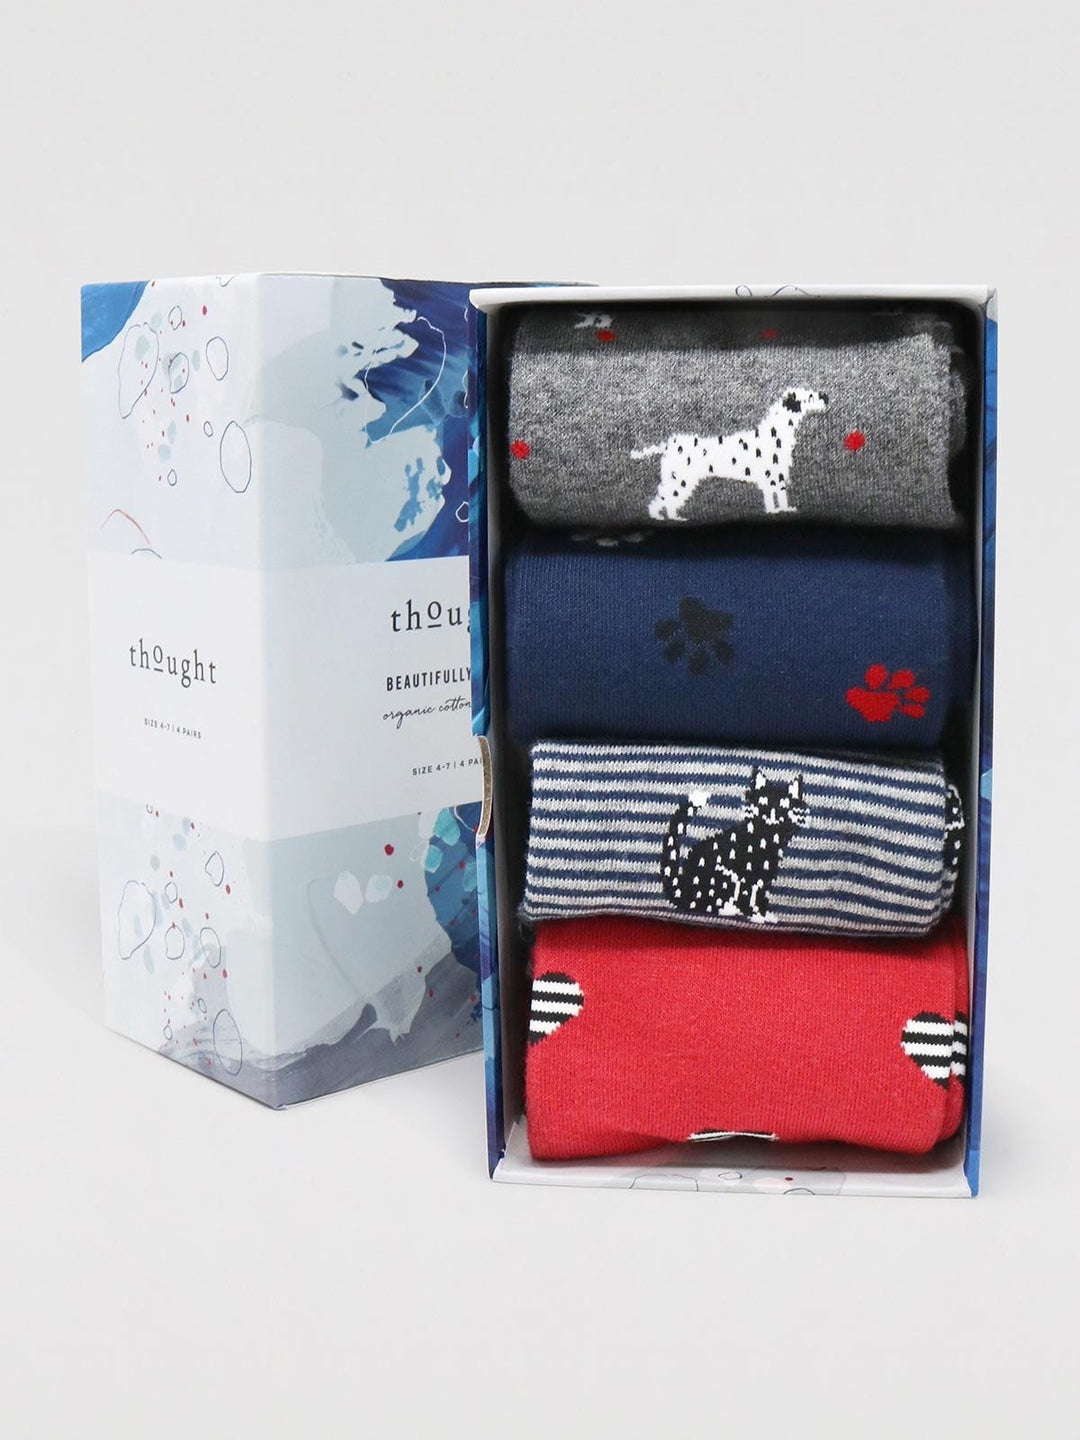 Thought Tillie GOTS Organic Cotton 4 Pack Animal Socks Gift Box - Crabtree Cottage